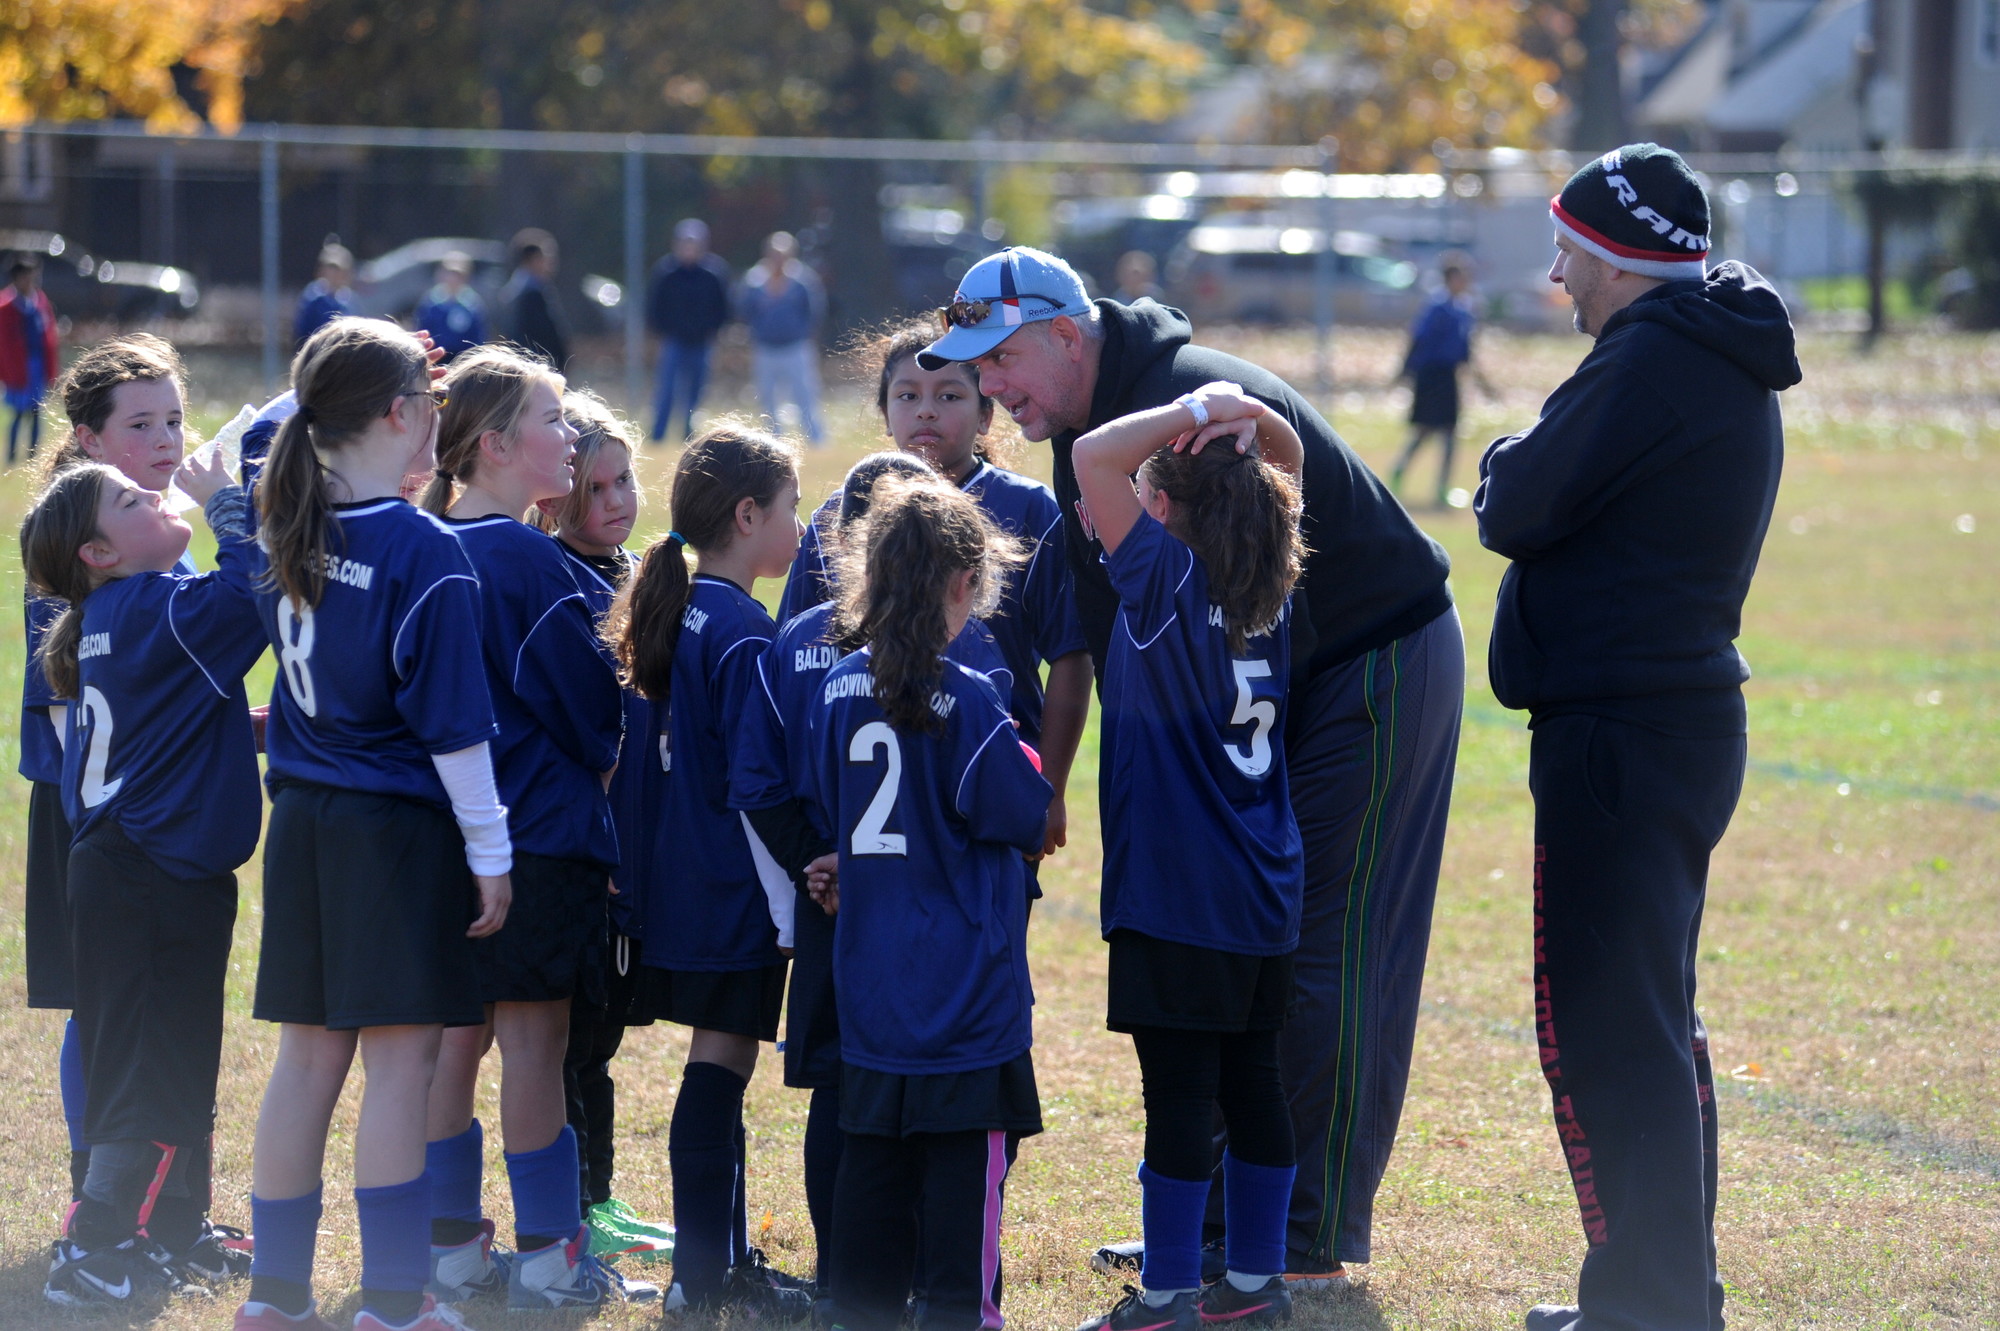 Coach Jeff Esposito gave his players a pep talk.